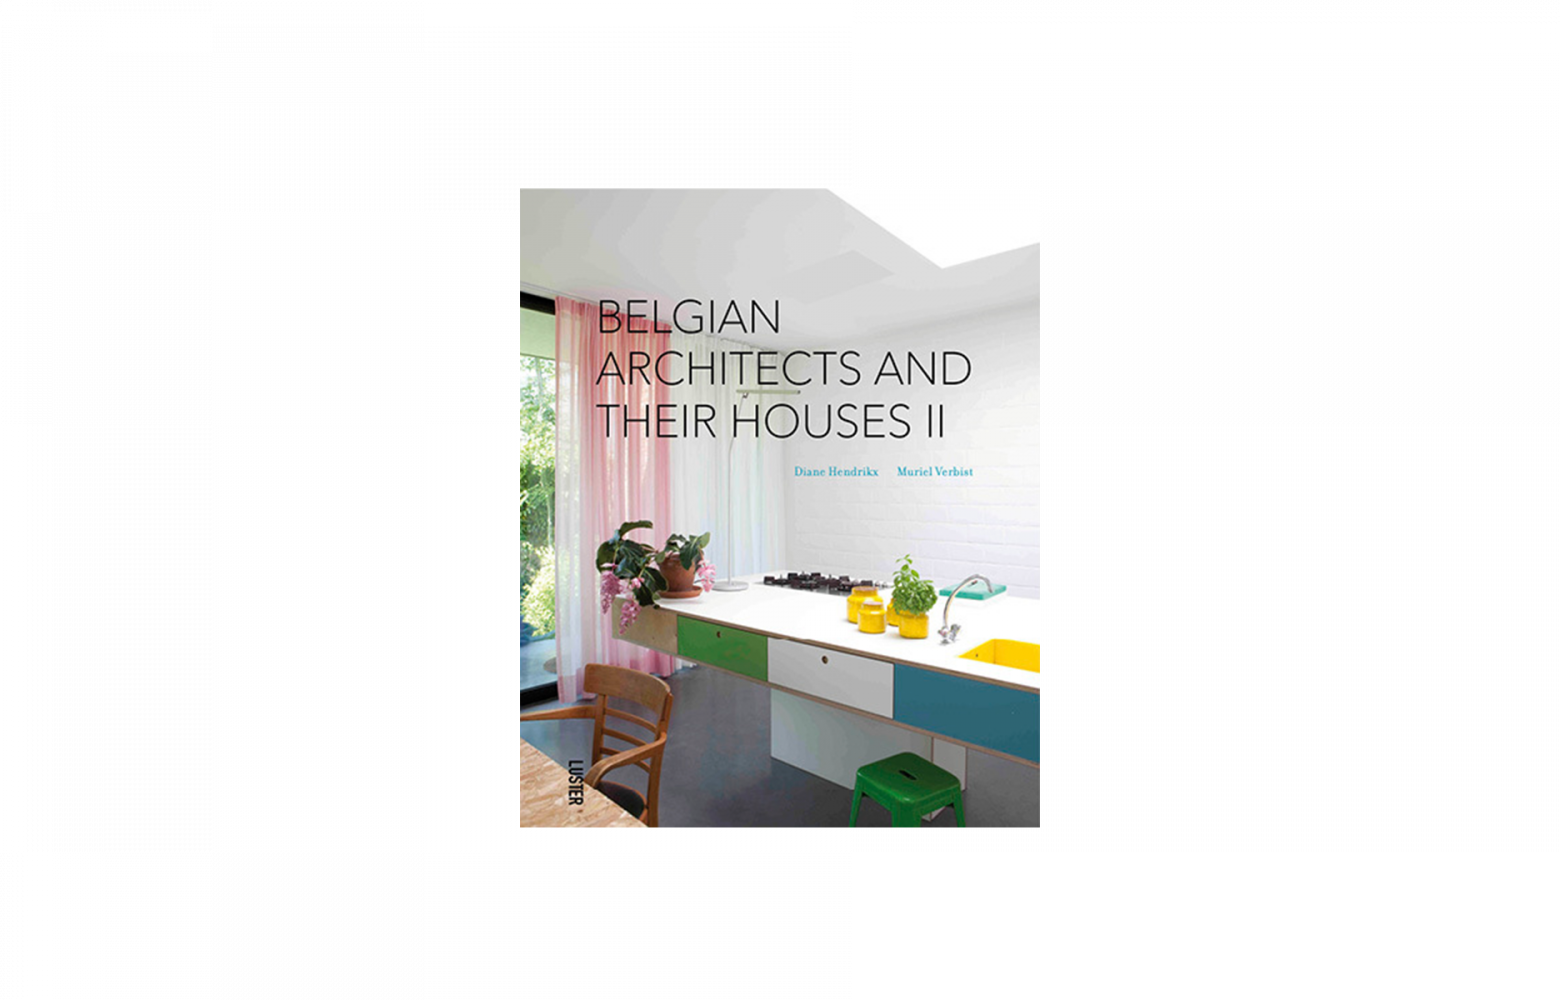 Belgian Architects and their houses II, de Muriel Verbist & Diane Hendrikx, 272 pages, Luster, 45 €.